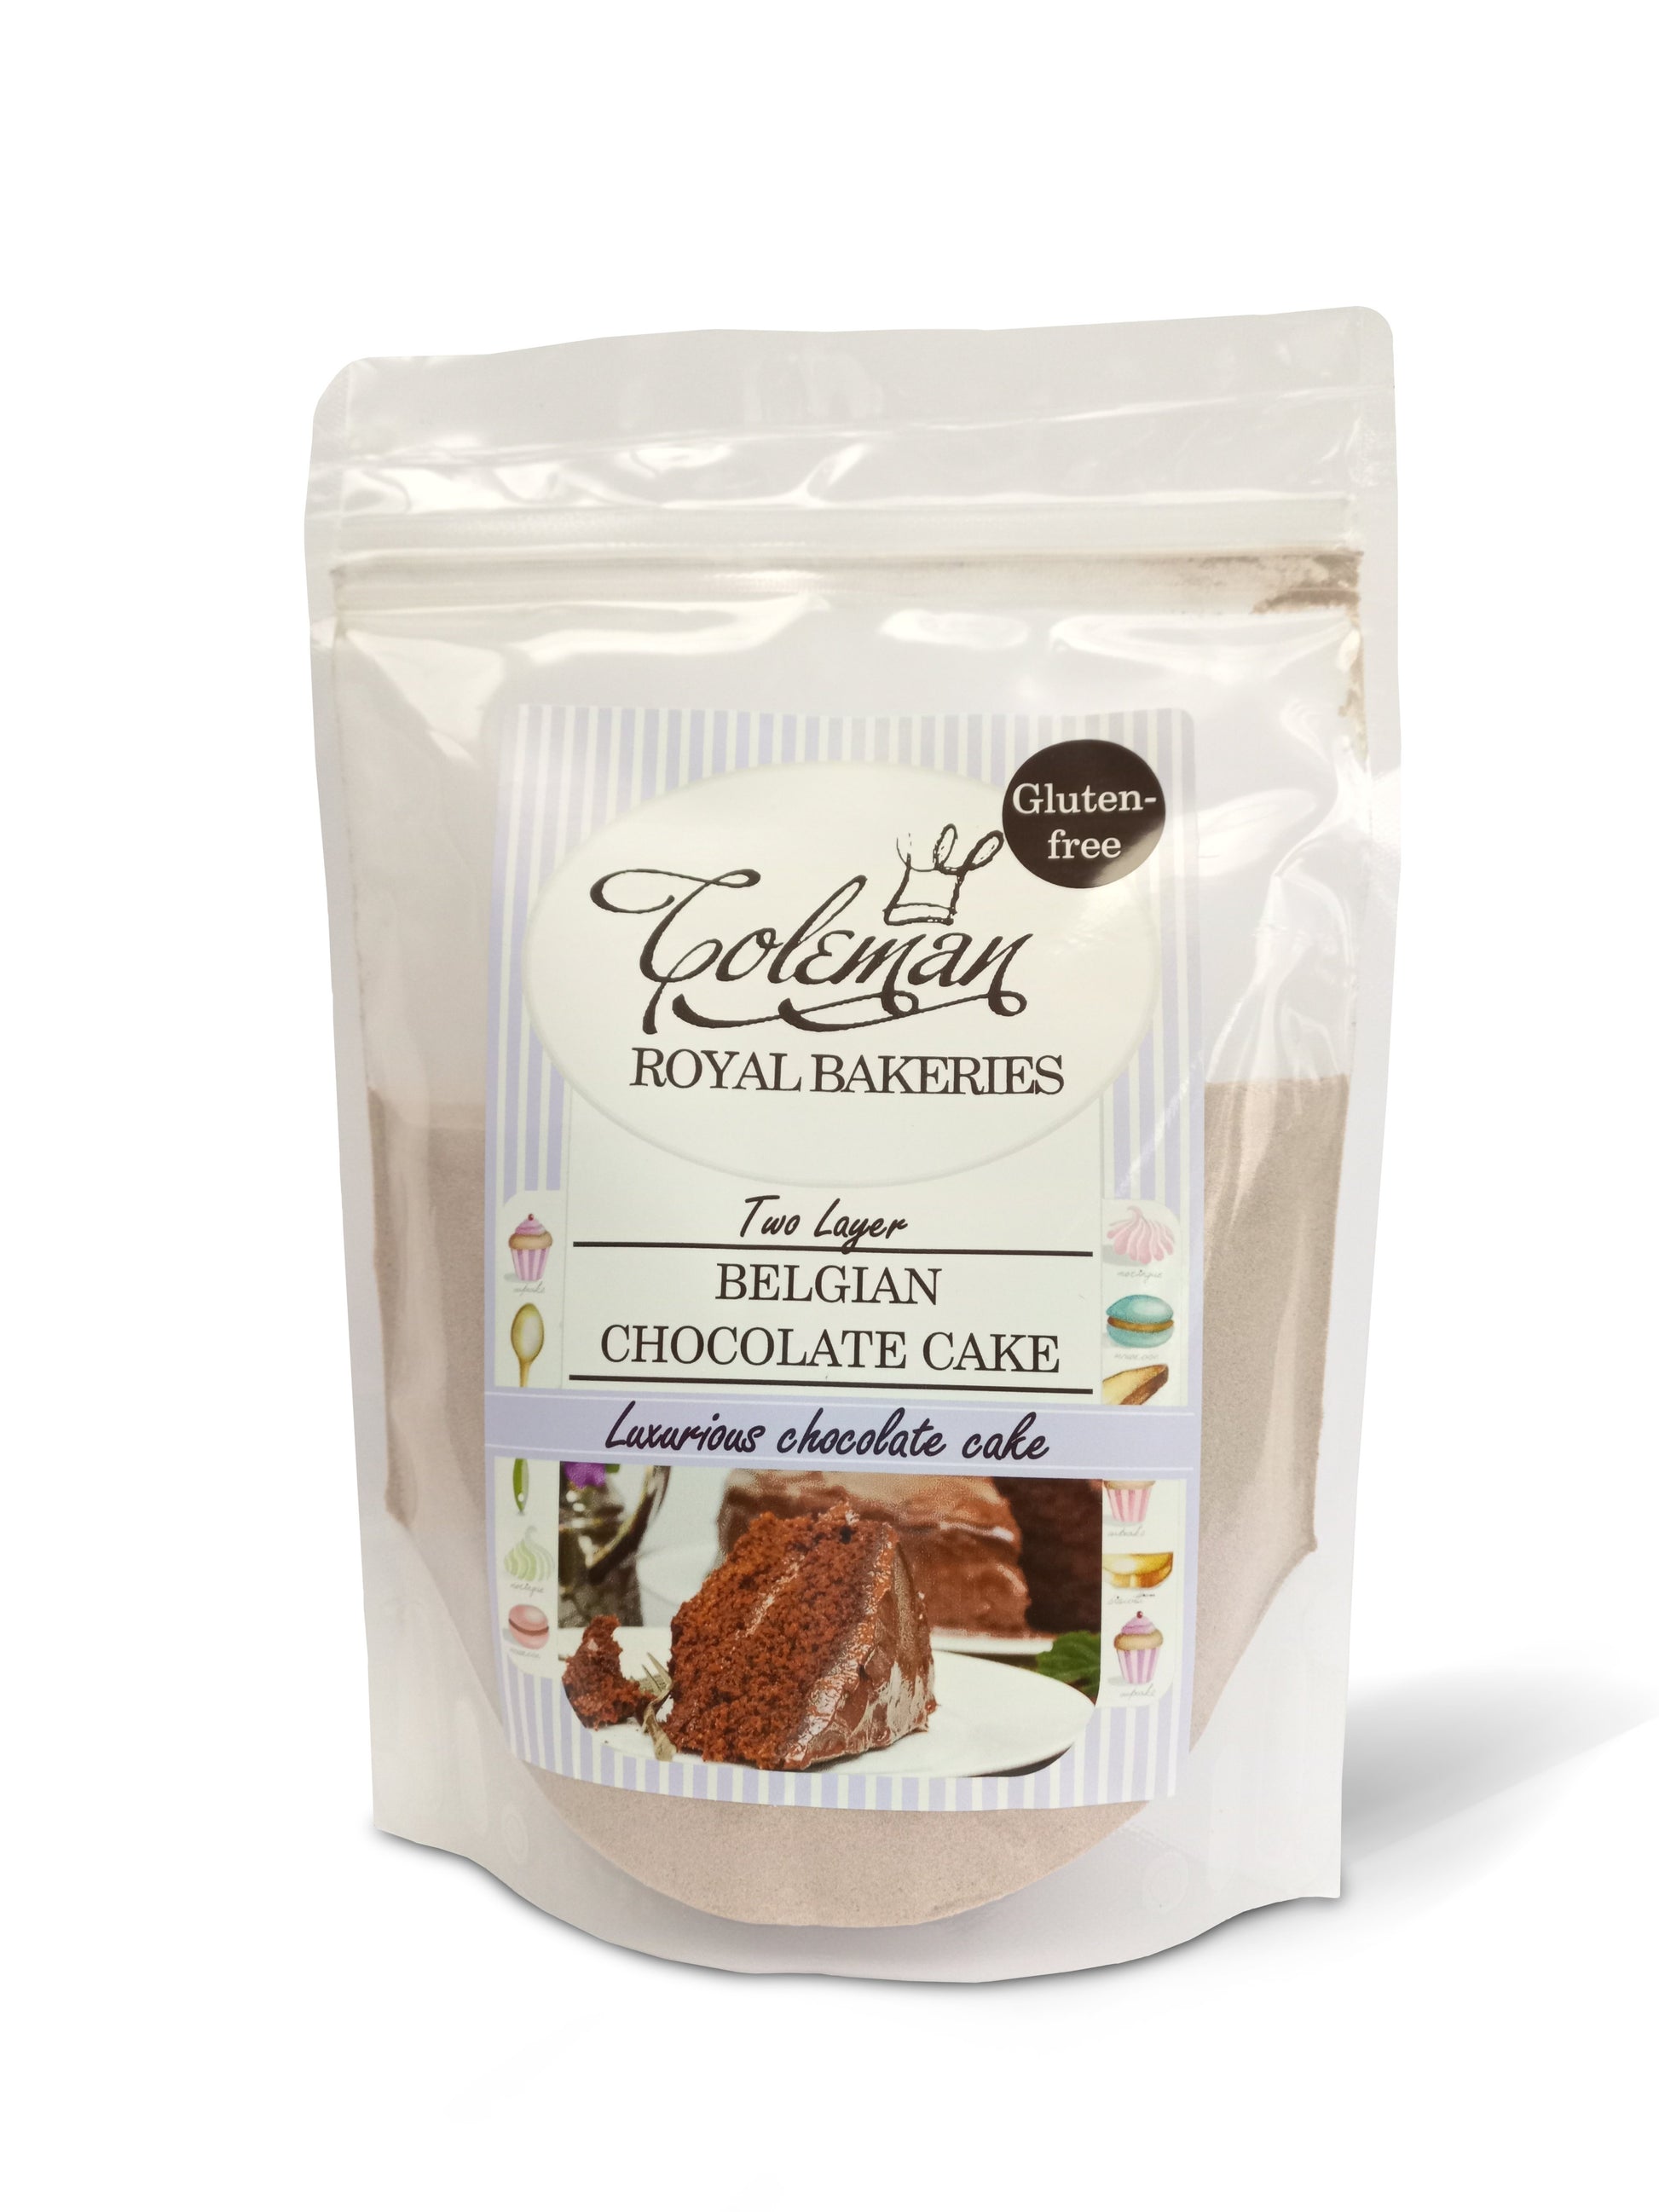 Coleman Royal Bakeries: Belgian Chocolate Cake, makes 2 layers. Certified gluten-free. Front and back labels.